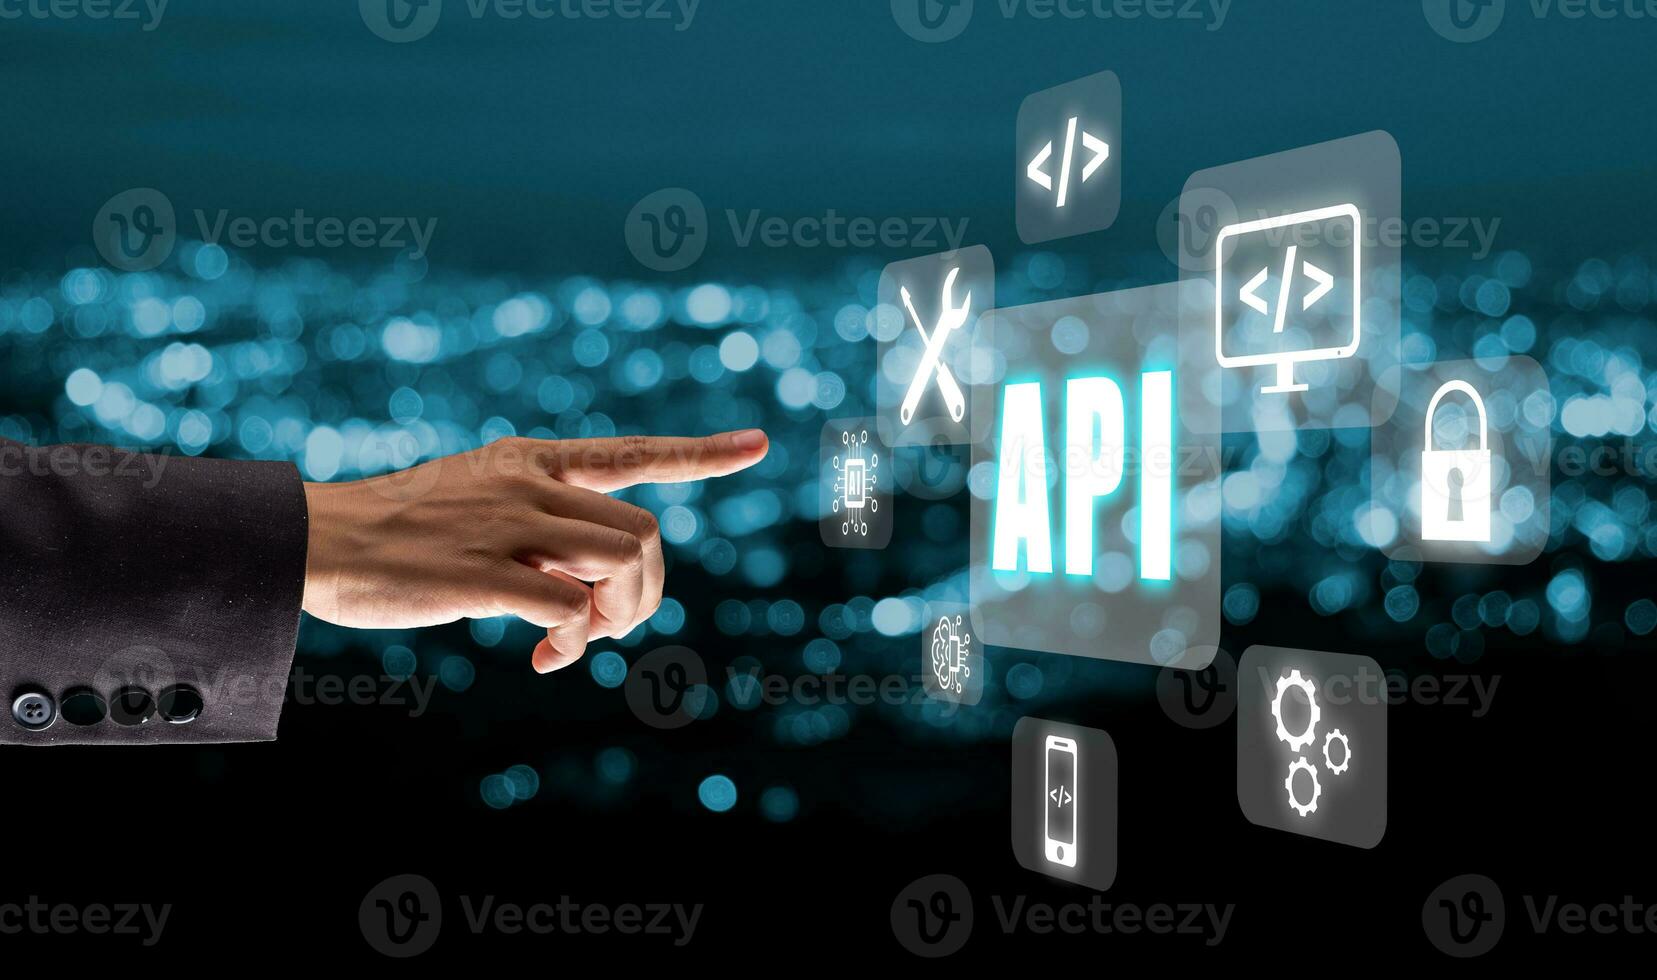 API - Application Programming Interface, Man presses button on touch screen interface and select API icon, Software development tool, modern technology, internet and networking concept. photo